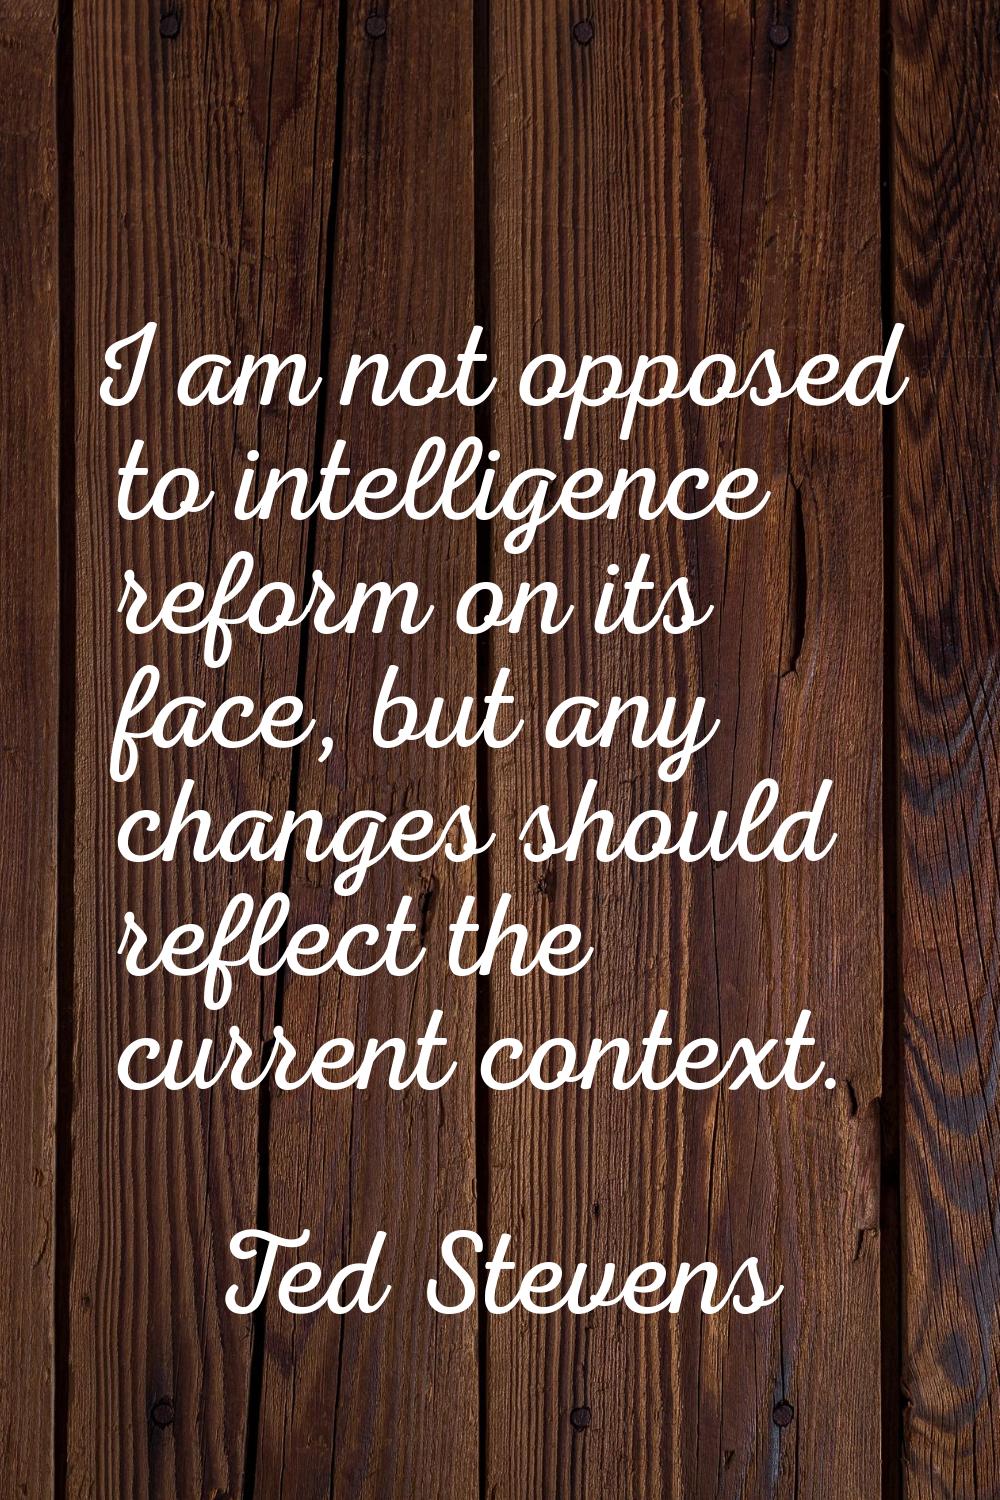 I am not opposed to intelligence reform on its face, but any changes should reflect the current con